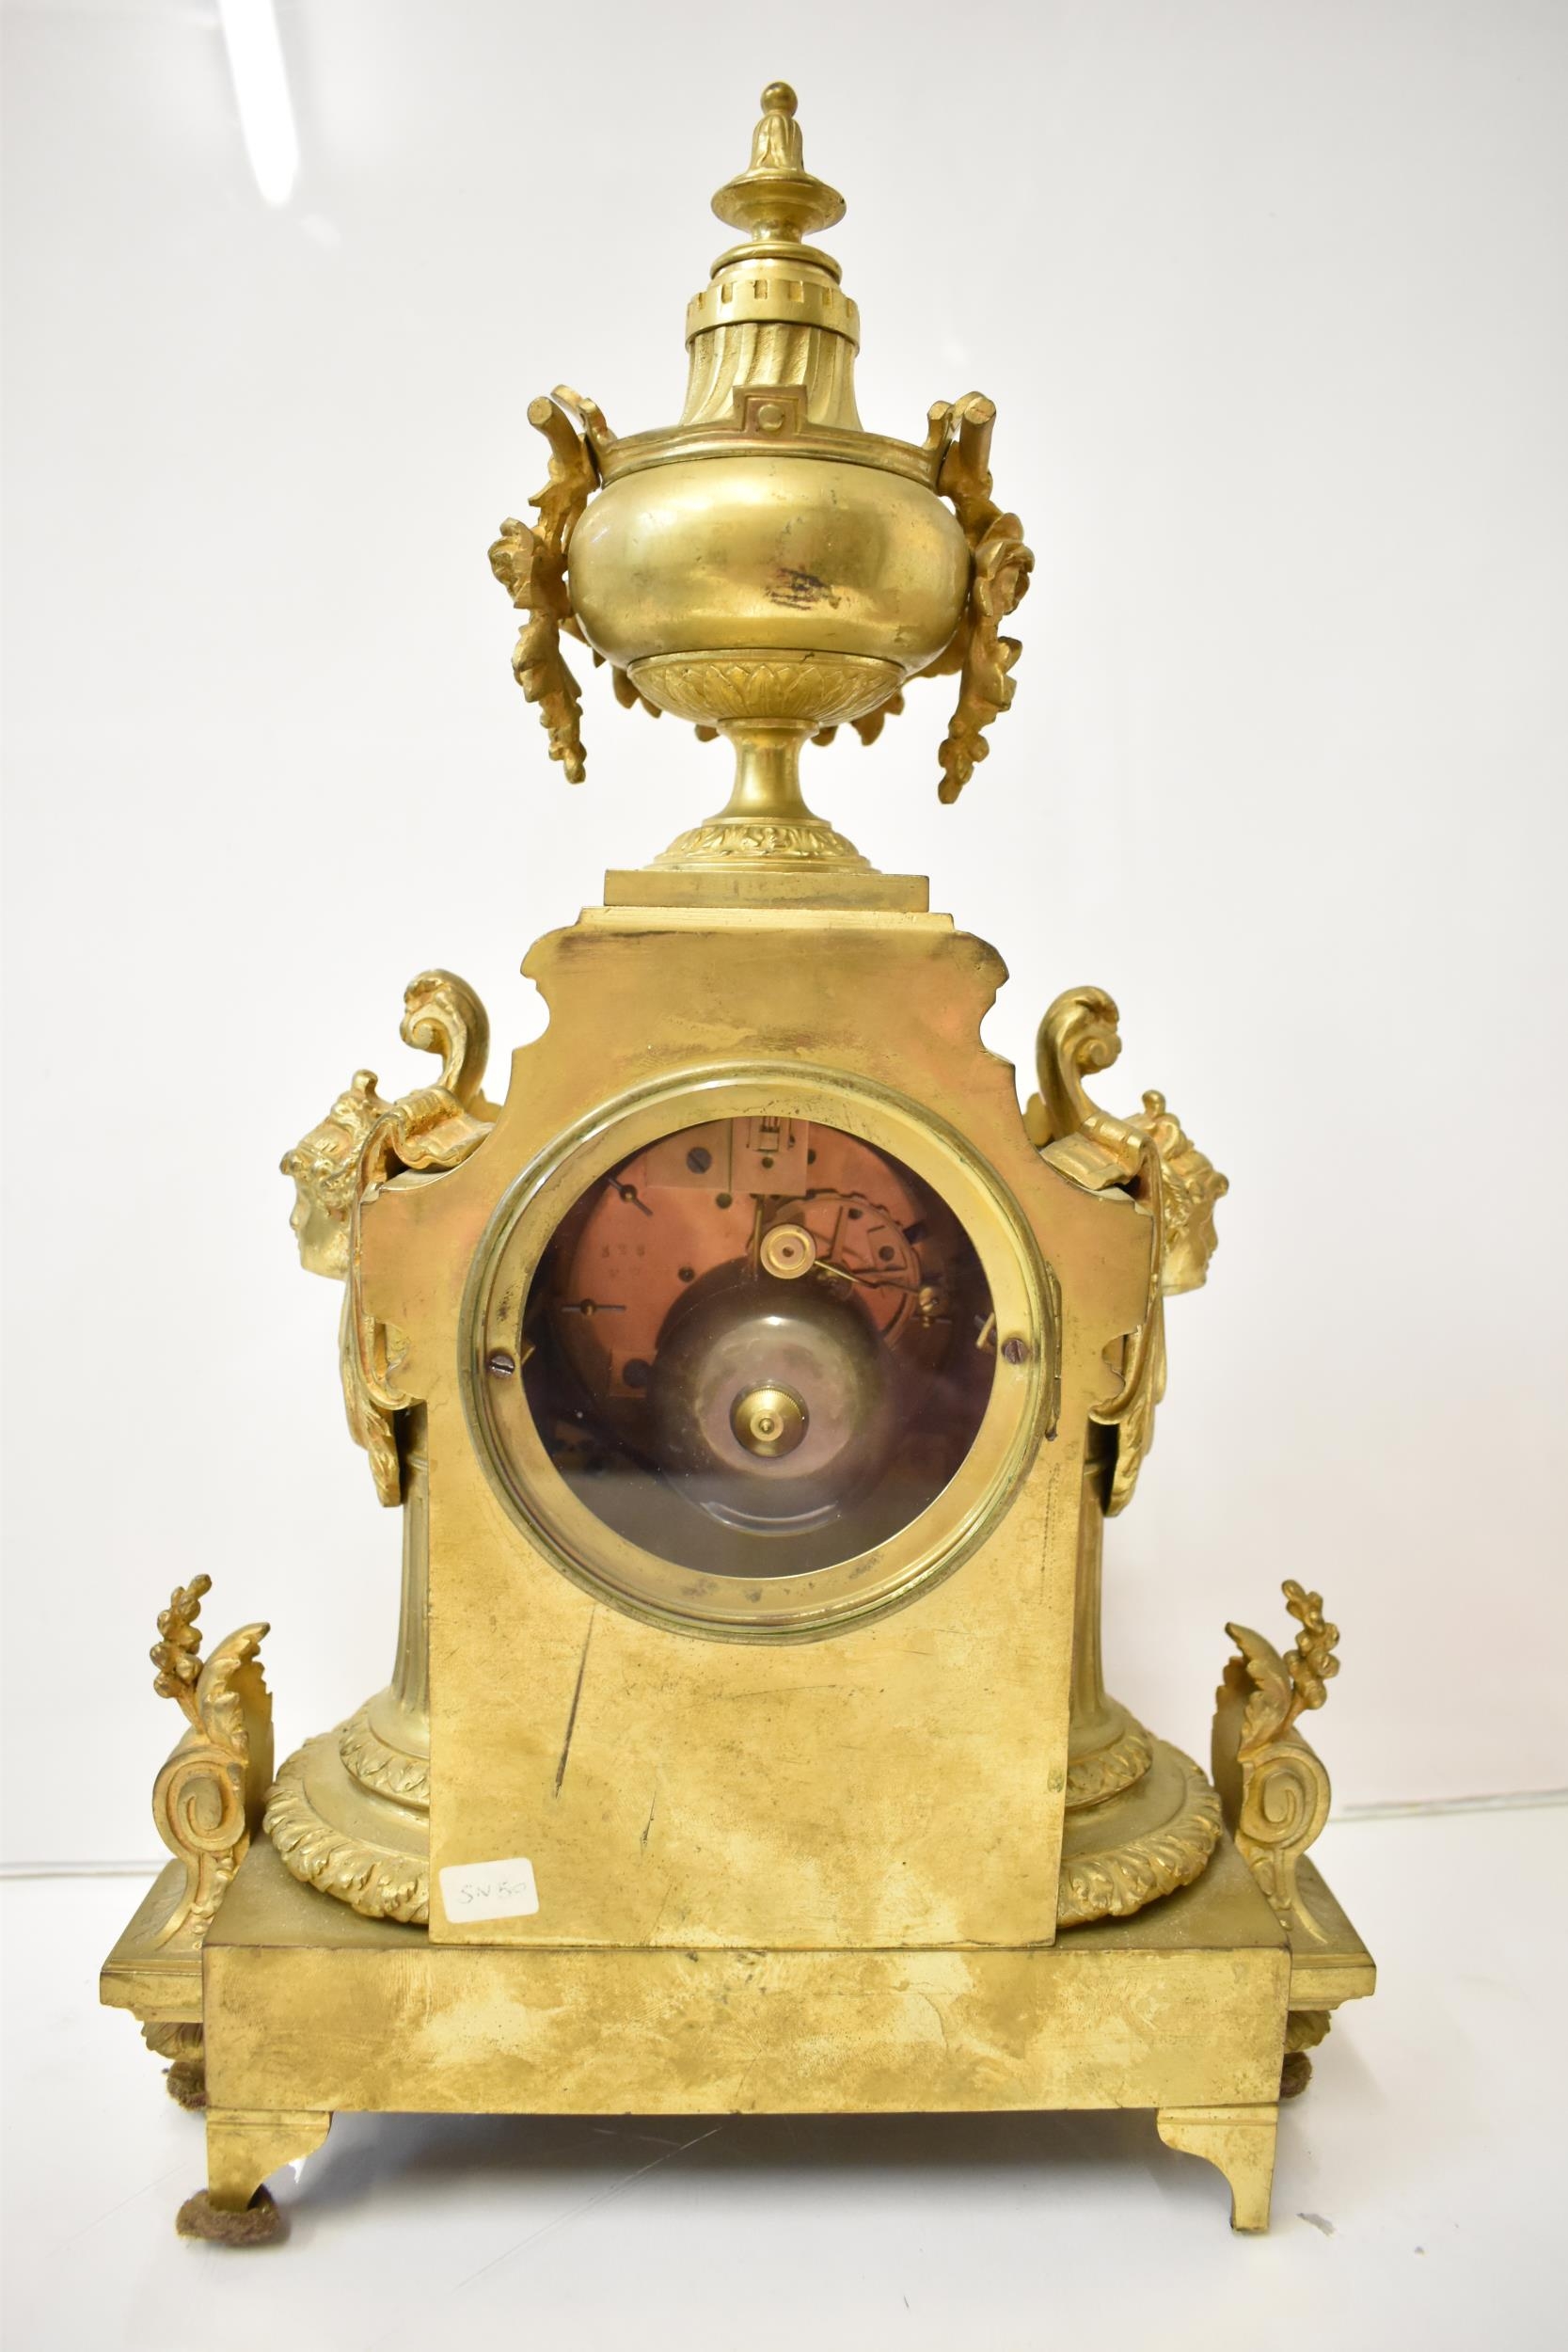 A 19th century French gilt metal mantel clock, the case having an urn shaped finial with floral - Image 3 of 6